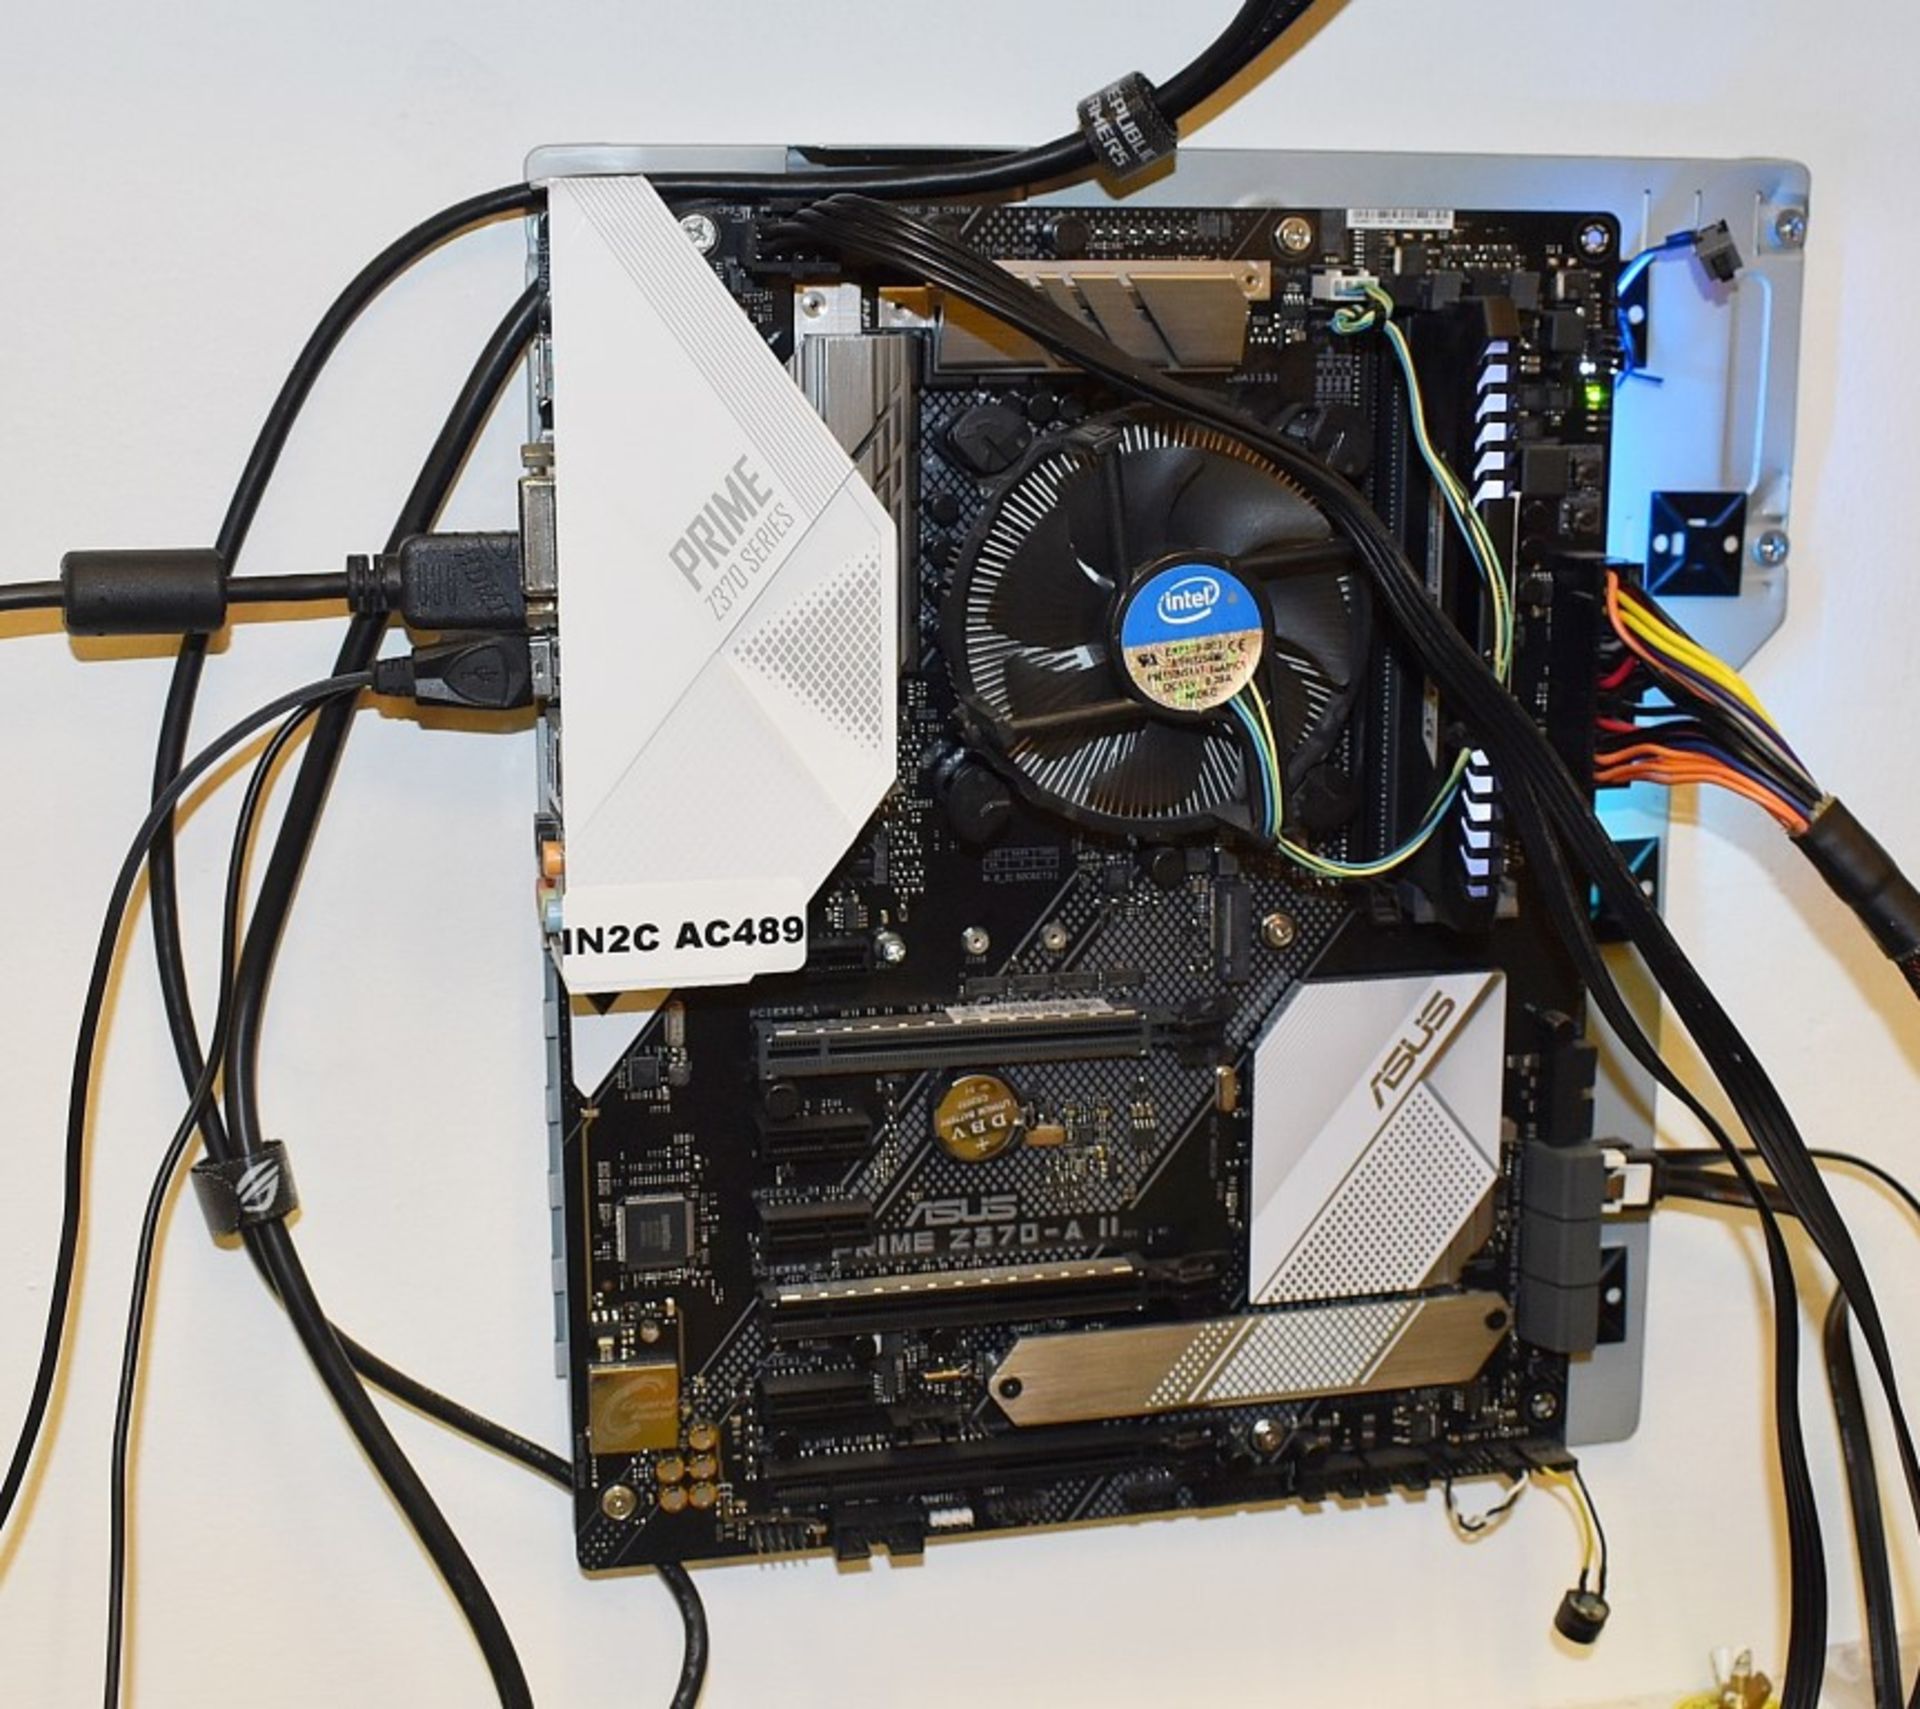 1 x Test Bench PC Components Including an Asus Prime Z370-A II Motherboard & Intel i3-8100 CPU - Image 12 of 18